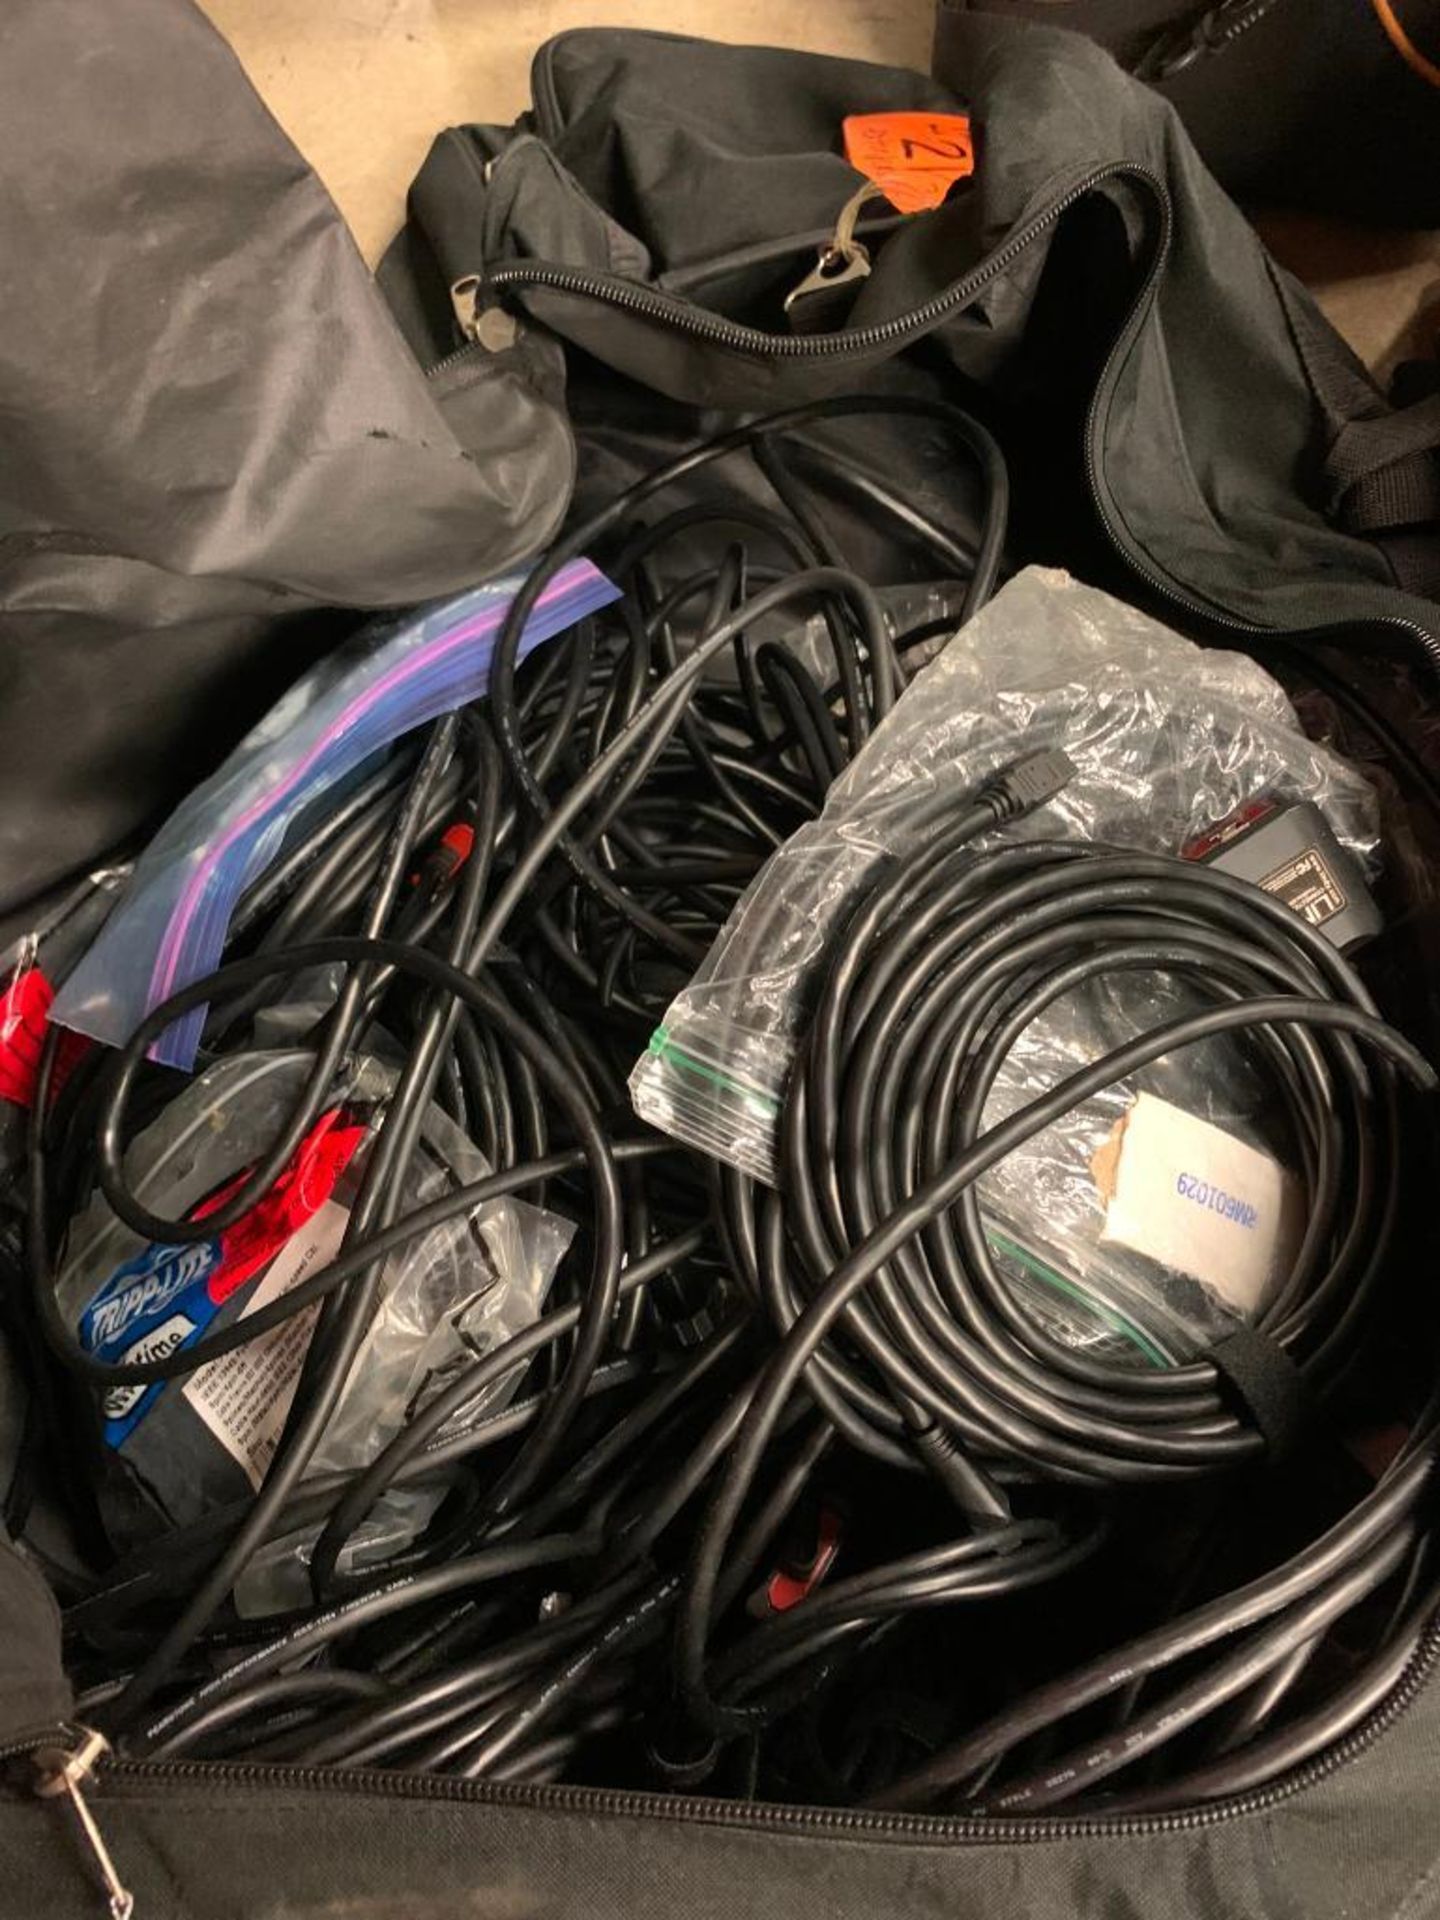 Large Lot of (10) AV Media Bags w/ Digital Camera Recorders, AV Cables, (30+) Tri-Pods, Cable Reels, - Image 20 of 25